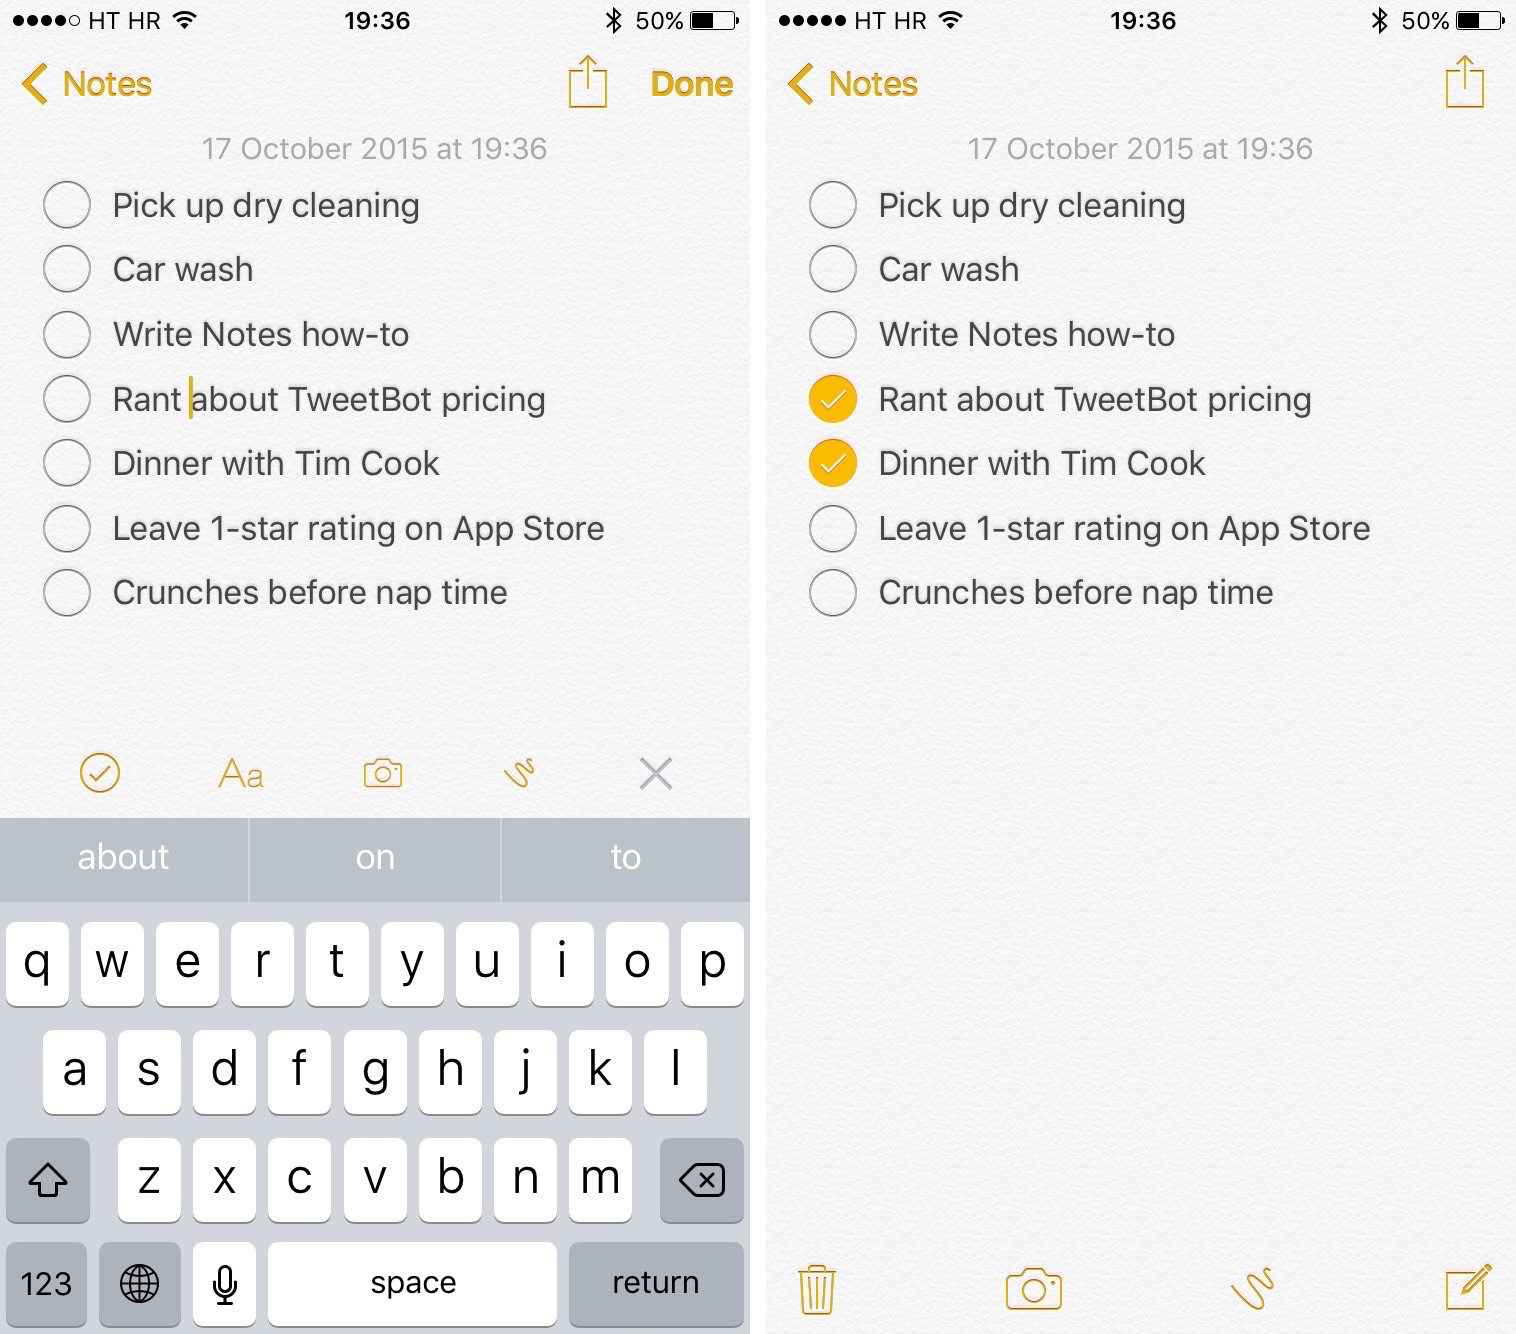 The Screenshot of Notes on iPhone